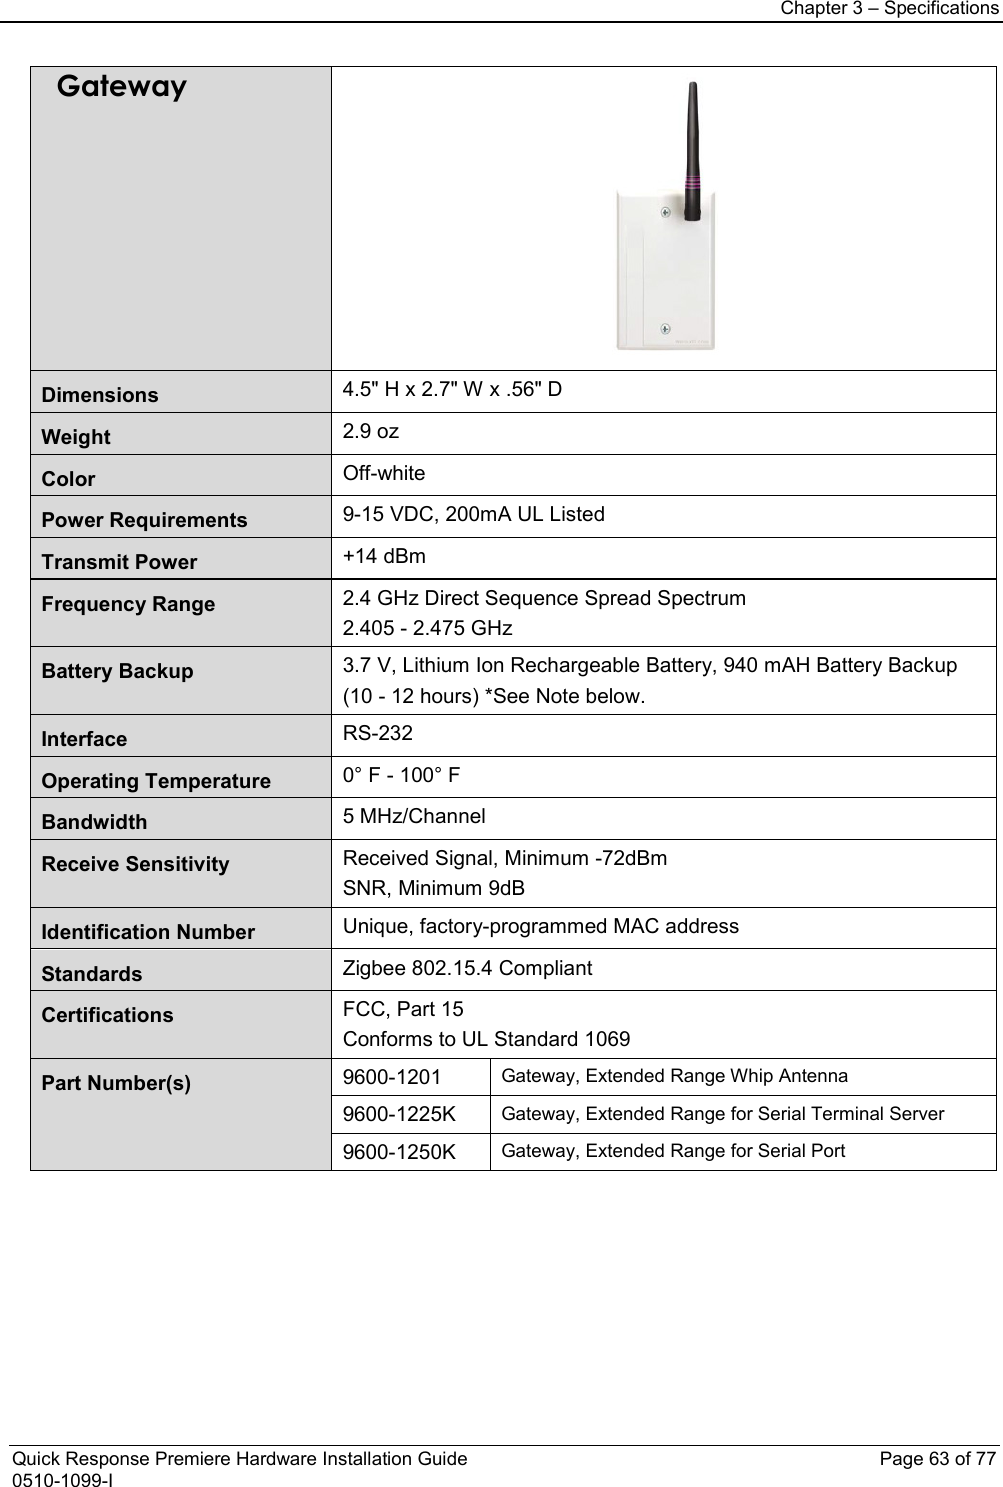 Chapter 3 – Specifications  Quick Response Premiere Hardware Installation Guide    Page 63 of 77 0510-1099-I Gateway  Dimensions 4.5&quot; H x 2.7&quot; W x .56&quot; D Weight 2.9 oz  Color Off-white Power Requirements 9-15 VDC, 200mA UL Listed Transmit Power +14 dBm Frequency Range 2.4 GHz Direct Sequence Spread Spectrum 2.405 - 2.475 GHz Battery Backup 3.7 V, Lithium Ion Rechargeable Battery, 940 mAH Battery Backup (10 - 12 hours) *See Note below. Interface RS-232 Operating Temperature 0° F - 100° F Bandwidth 5 MHz/Channel Receive Sensitivity Received Signal, Minimum -72dBm SNR, Minimum 9dB Identification Number Unique, factory-programmed MAC address Standards Zigbee 802.15.4 Compliant Certifications FCC, Part 15 Conforms to UL Standard 1069 Part Number(s)  9600-1201 Gateway, Extended Range Whip Antenna 9600-1225K Gateway, Extended Range for Serial Terminal Server 9600-1250K Gateway, Extended Range for Serial Port        